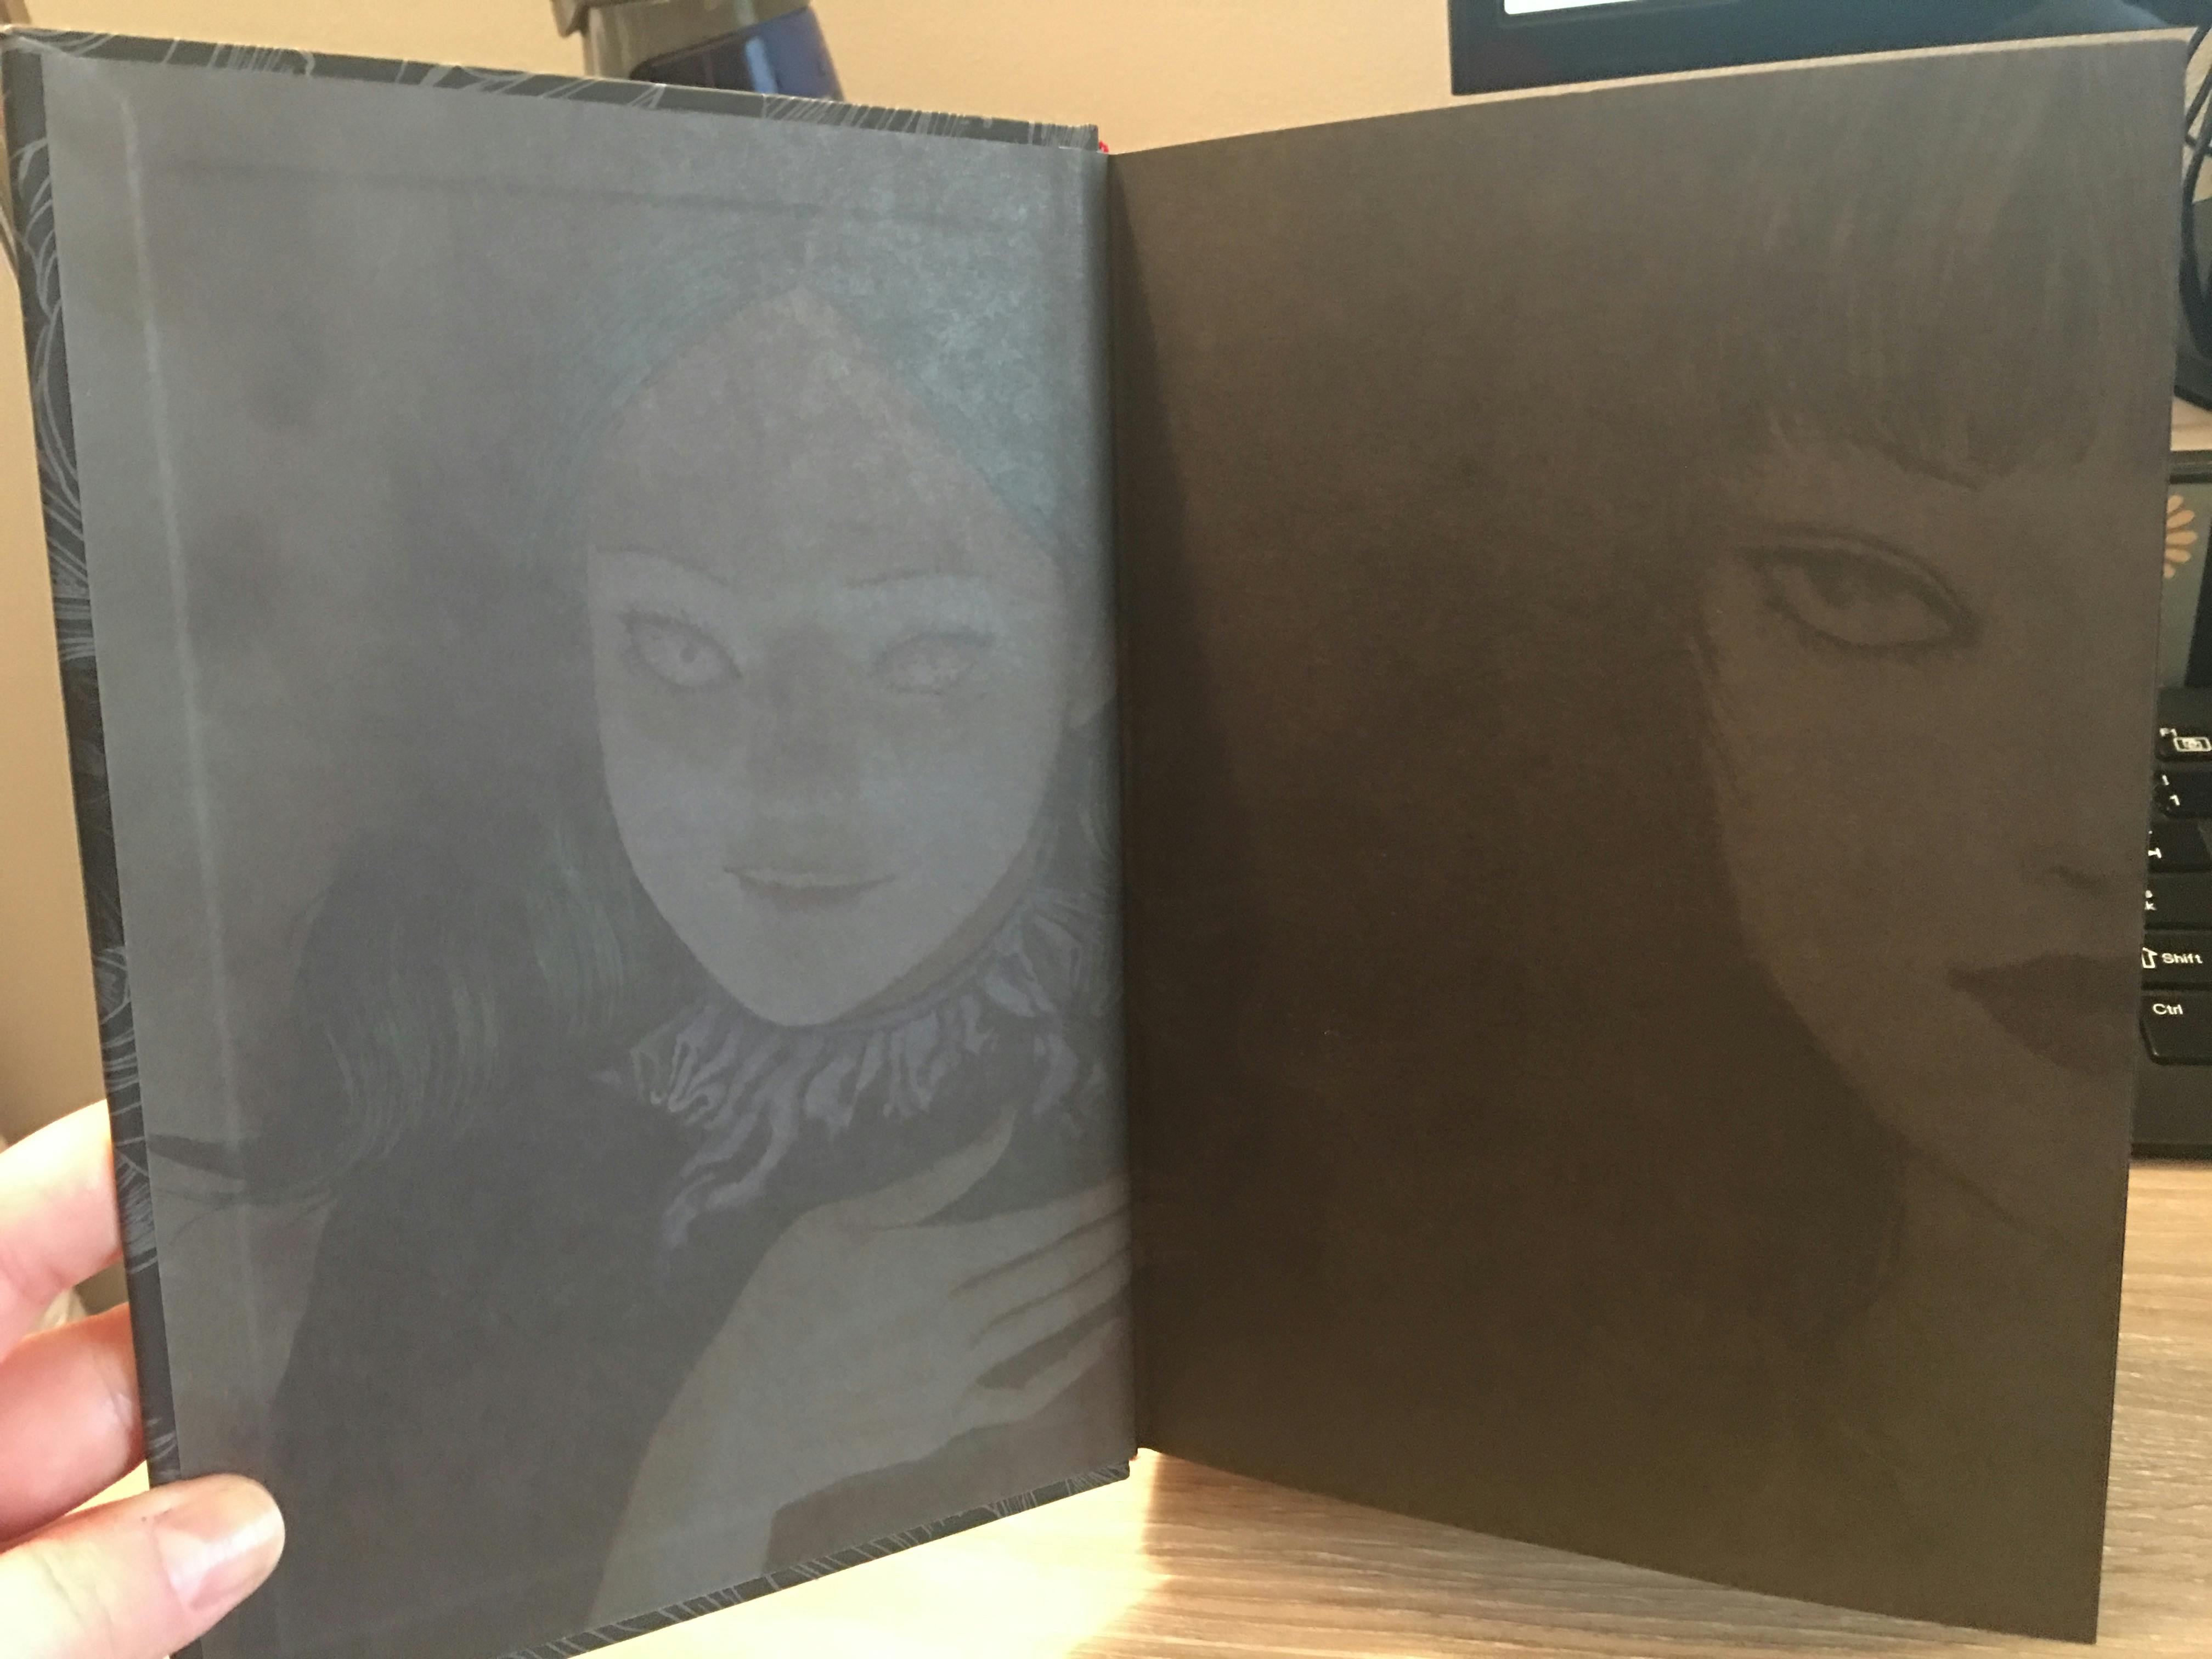 Even the black pages have a beautiful (and creepy) touch.